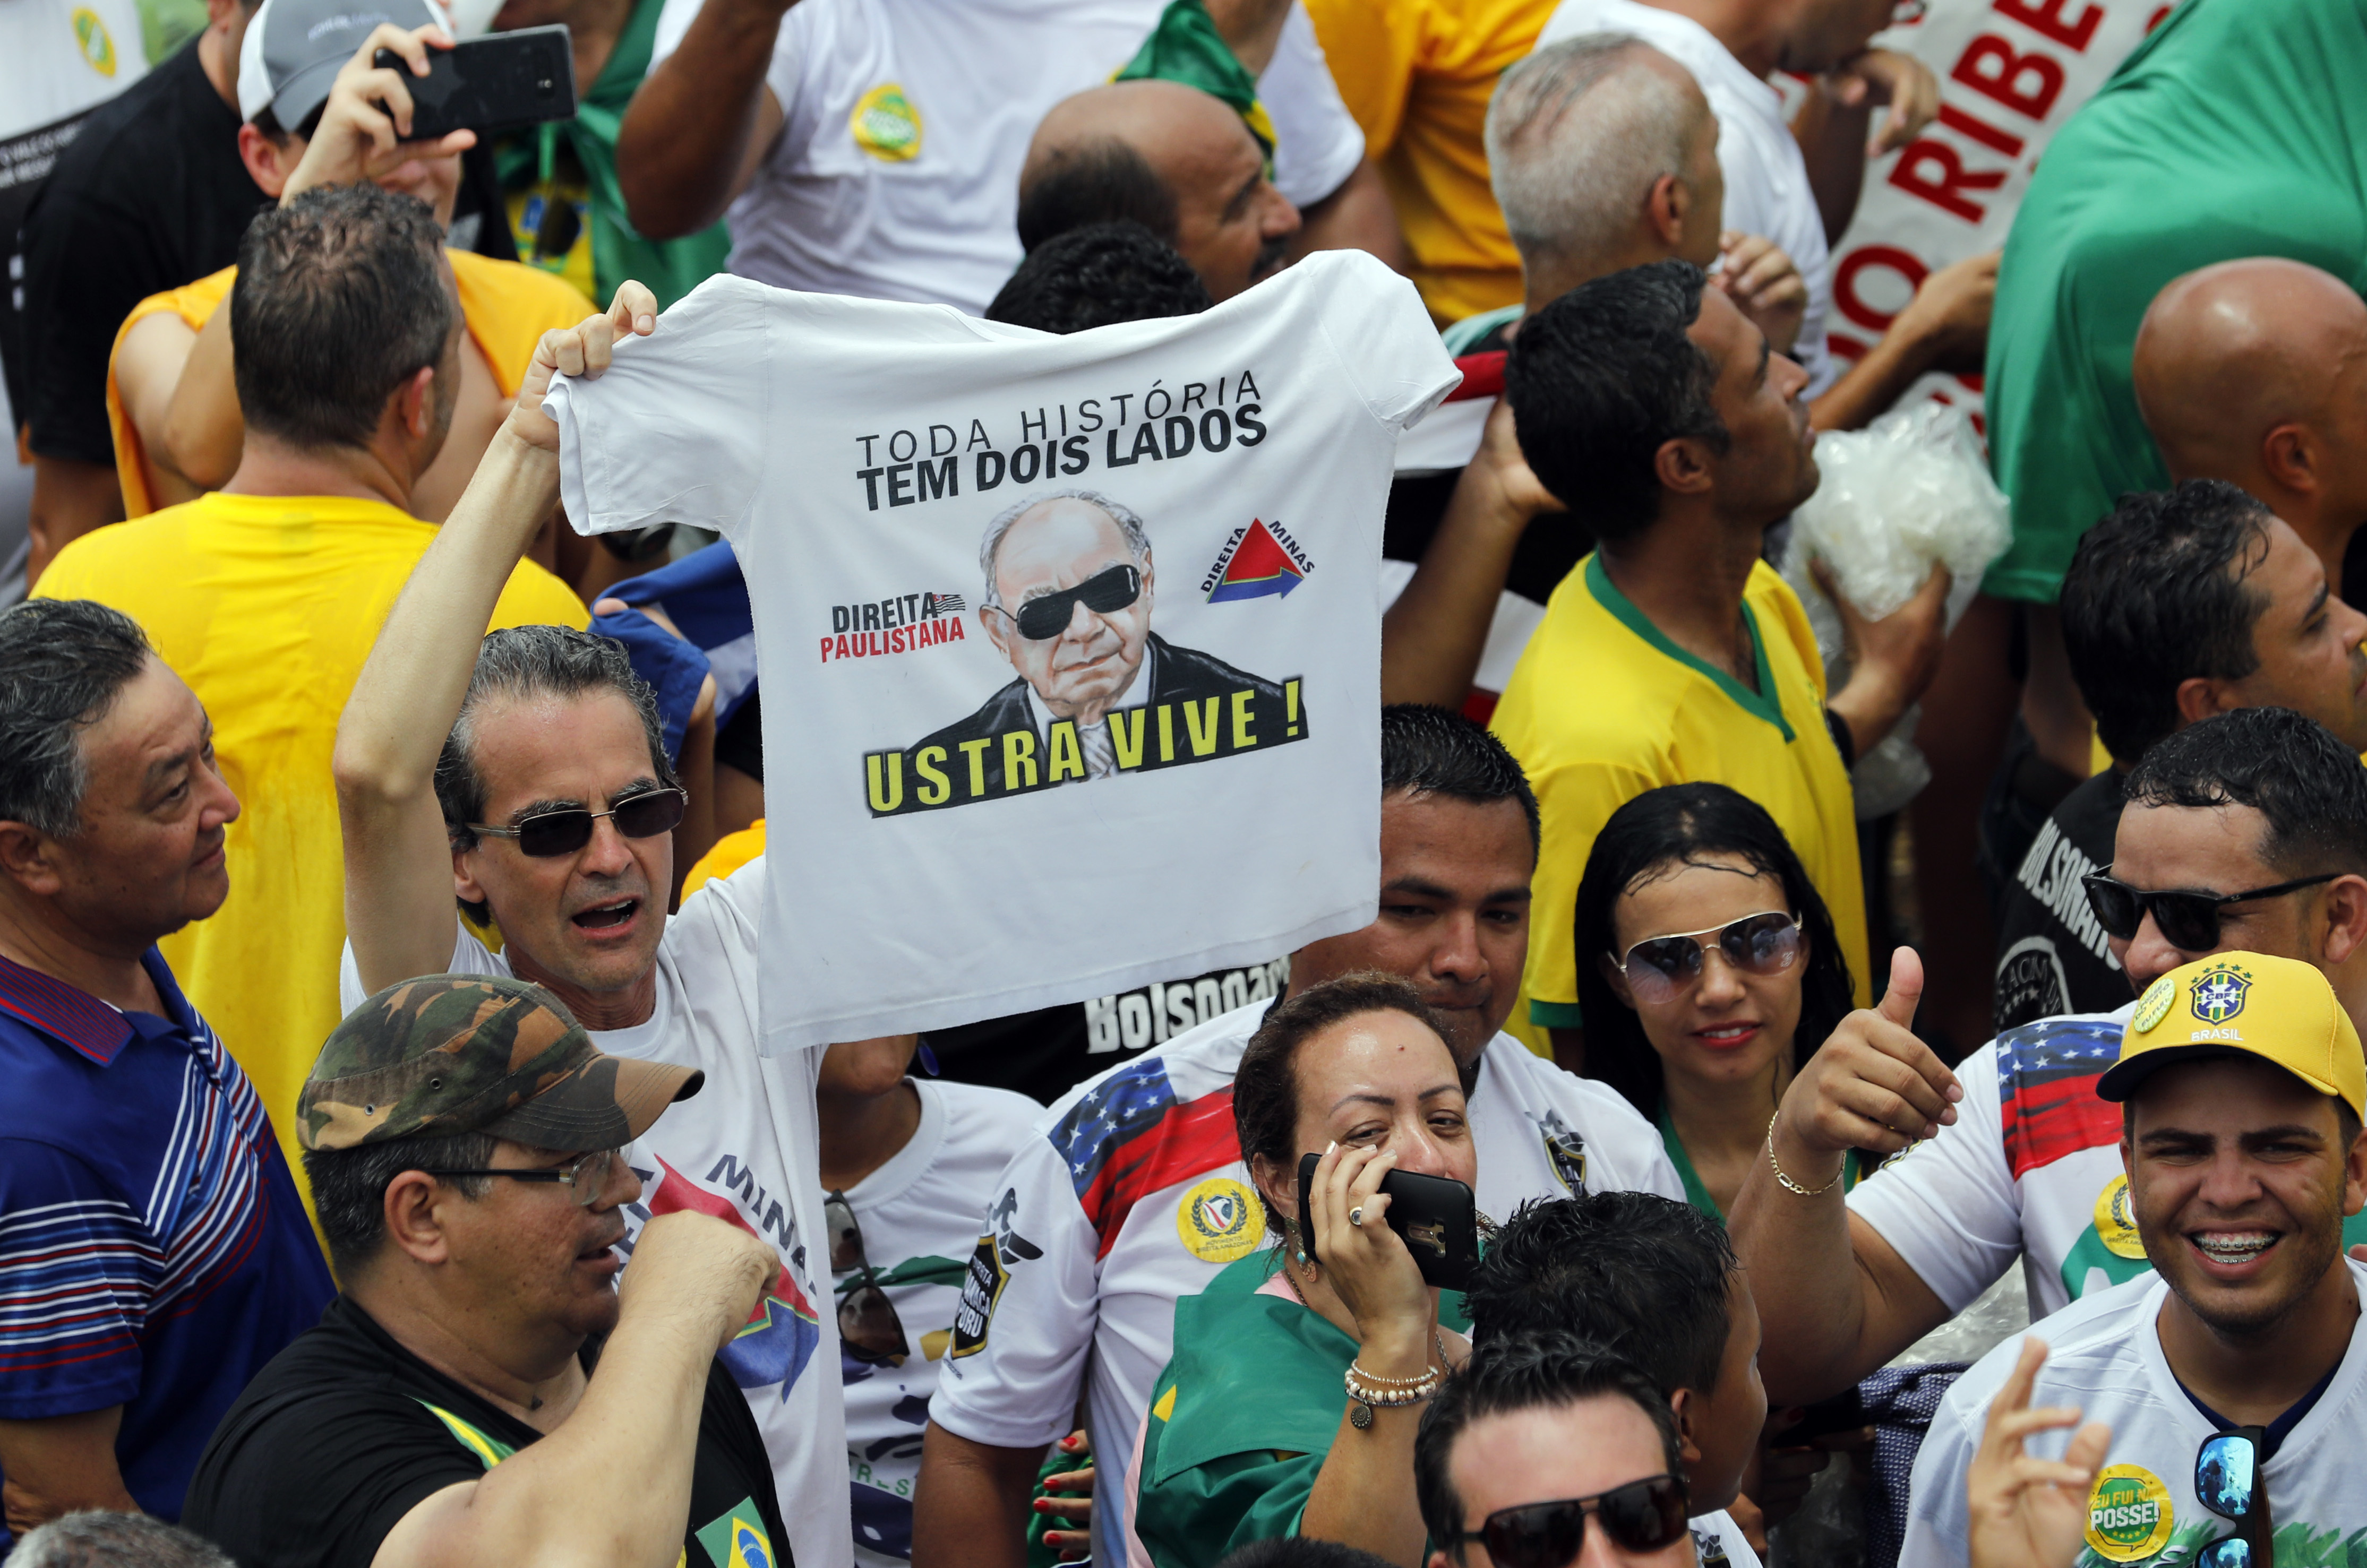 A supporter of Brazil's President Elect Jair Bolsonaro holds a T-shirt with the image of former army officer and right wing politician Carlos Alberto Brilhante Ustra, prior Bolsonaro's inauguration, in Brasilia, Brazil, Tuesday Jan. 1, 2019. Ustra, who died in 2015, became the first military official to be recognized, by a civil court in Sao Paulo, as a torturer during the military dictatorship. (AP Photo/Silvia Izquierdo)